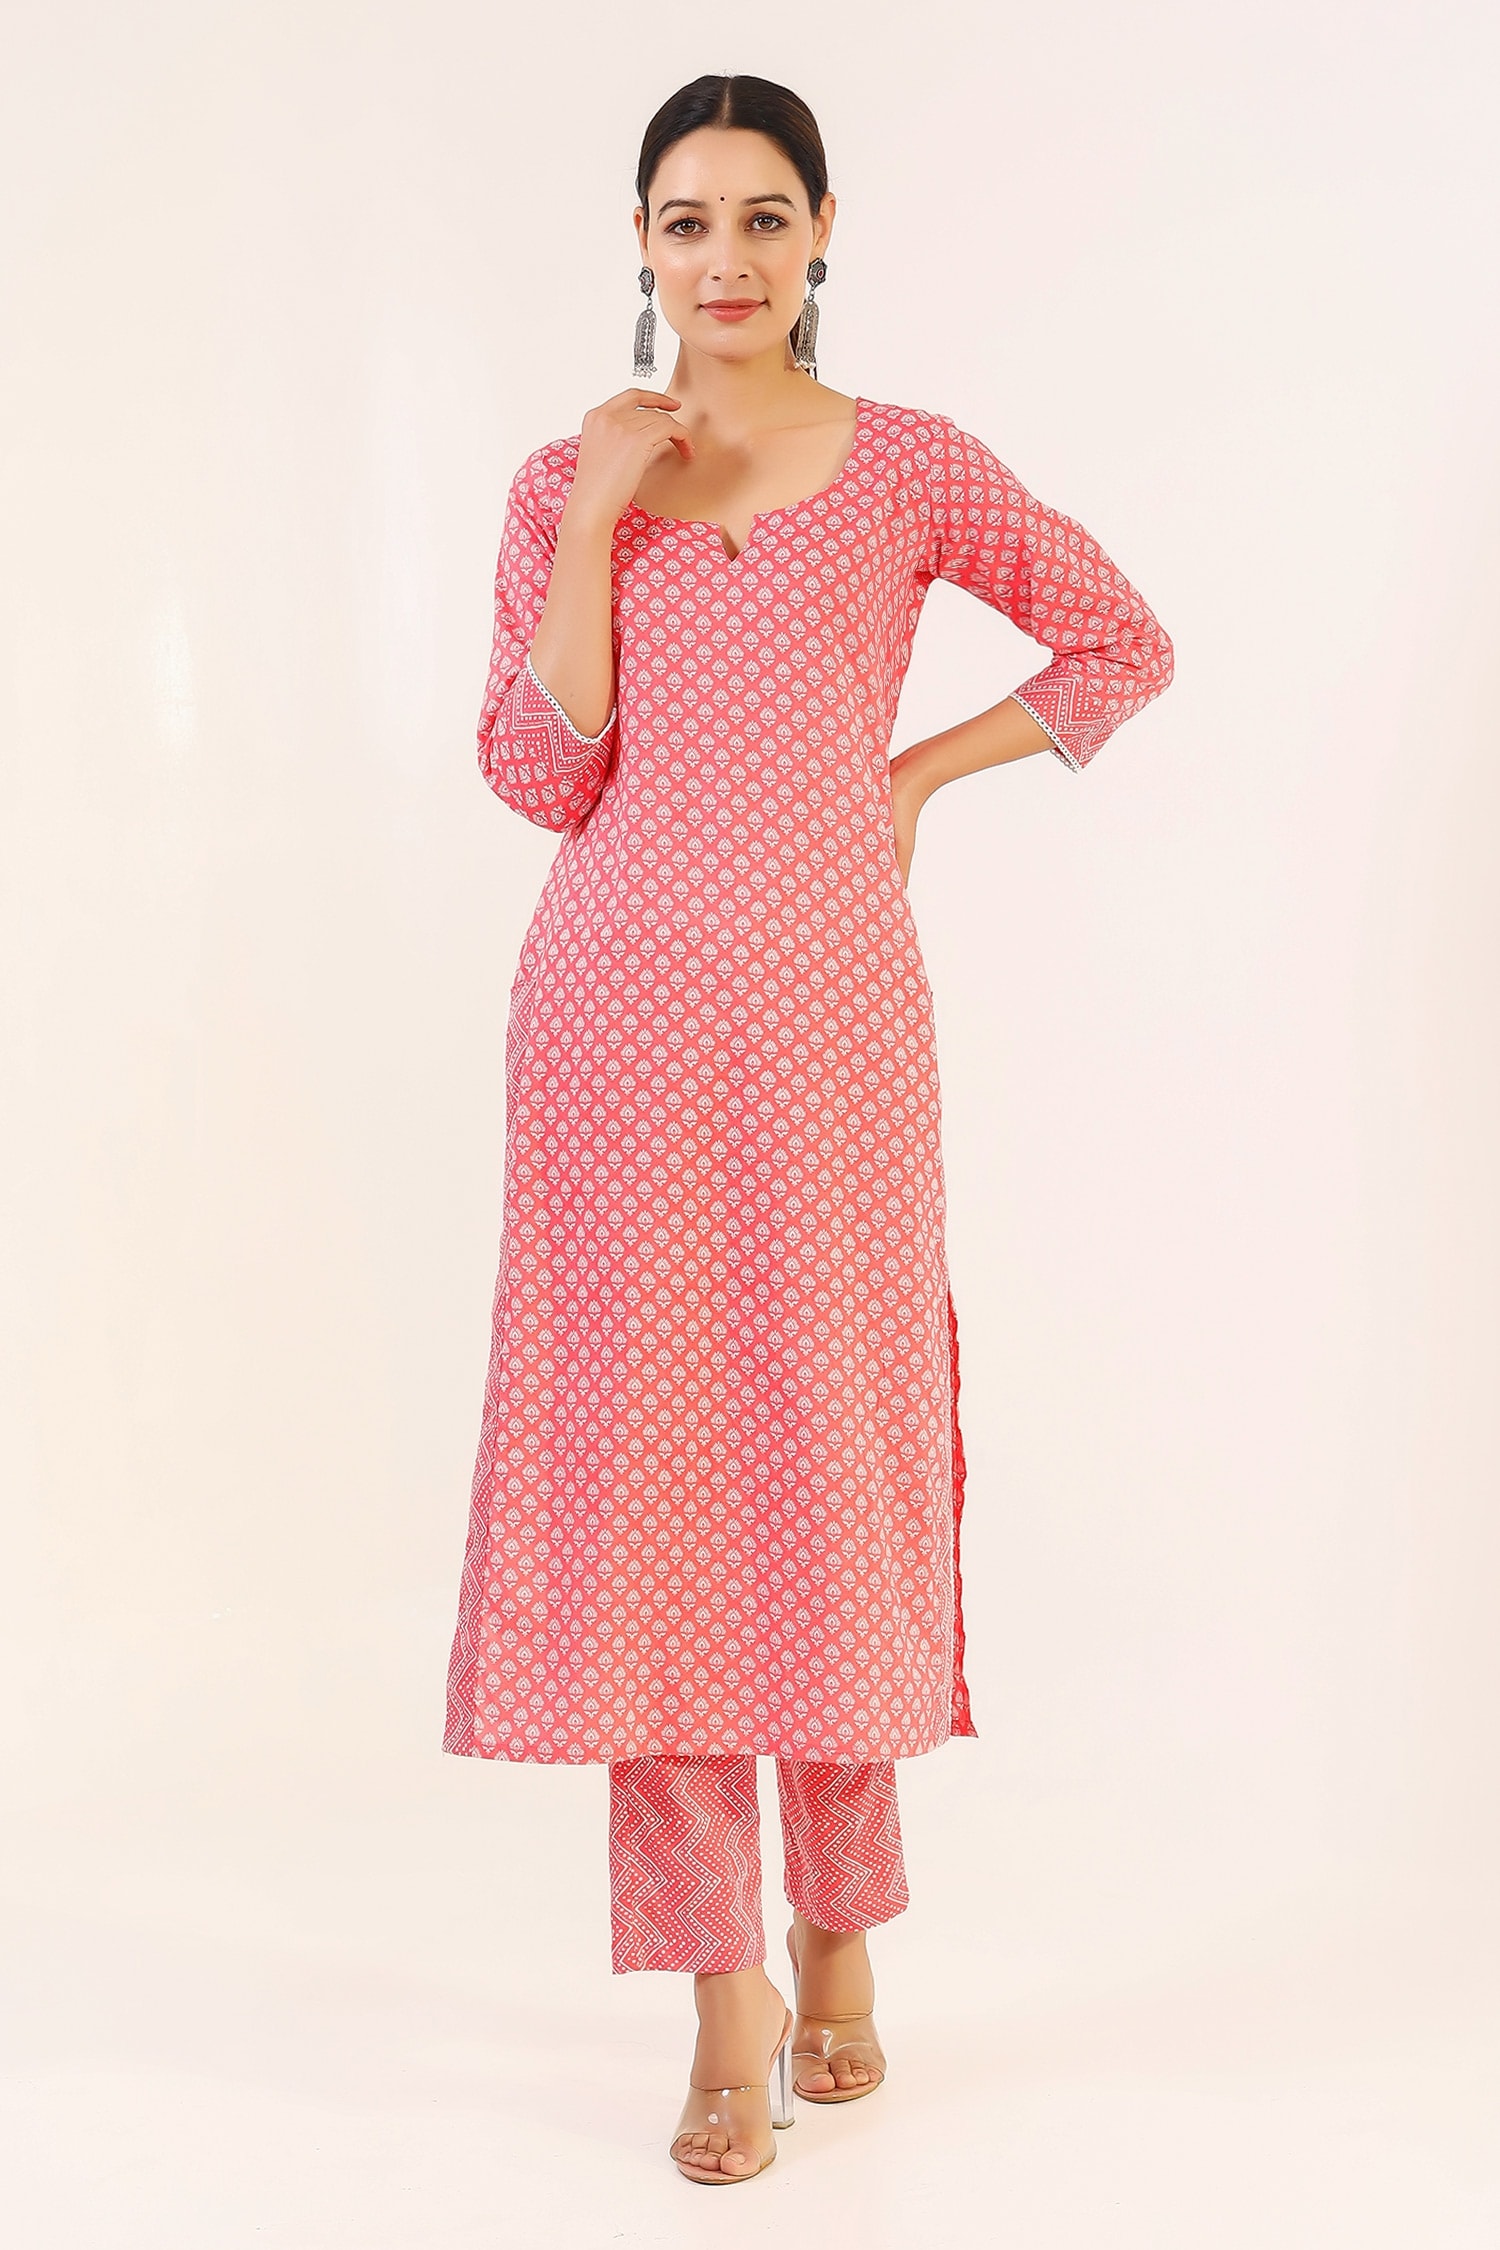 Pheeta Peach Cotton Hand Printed Floral Notched Kurta And Pant Set For Women